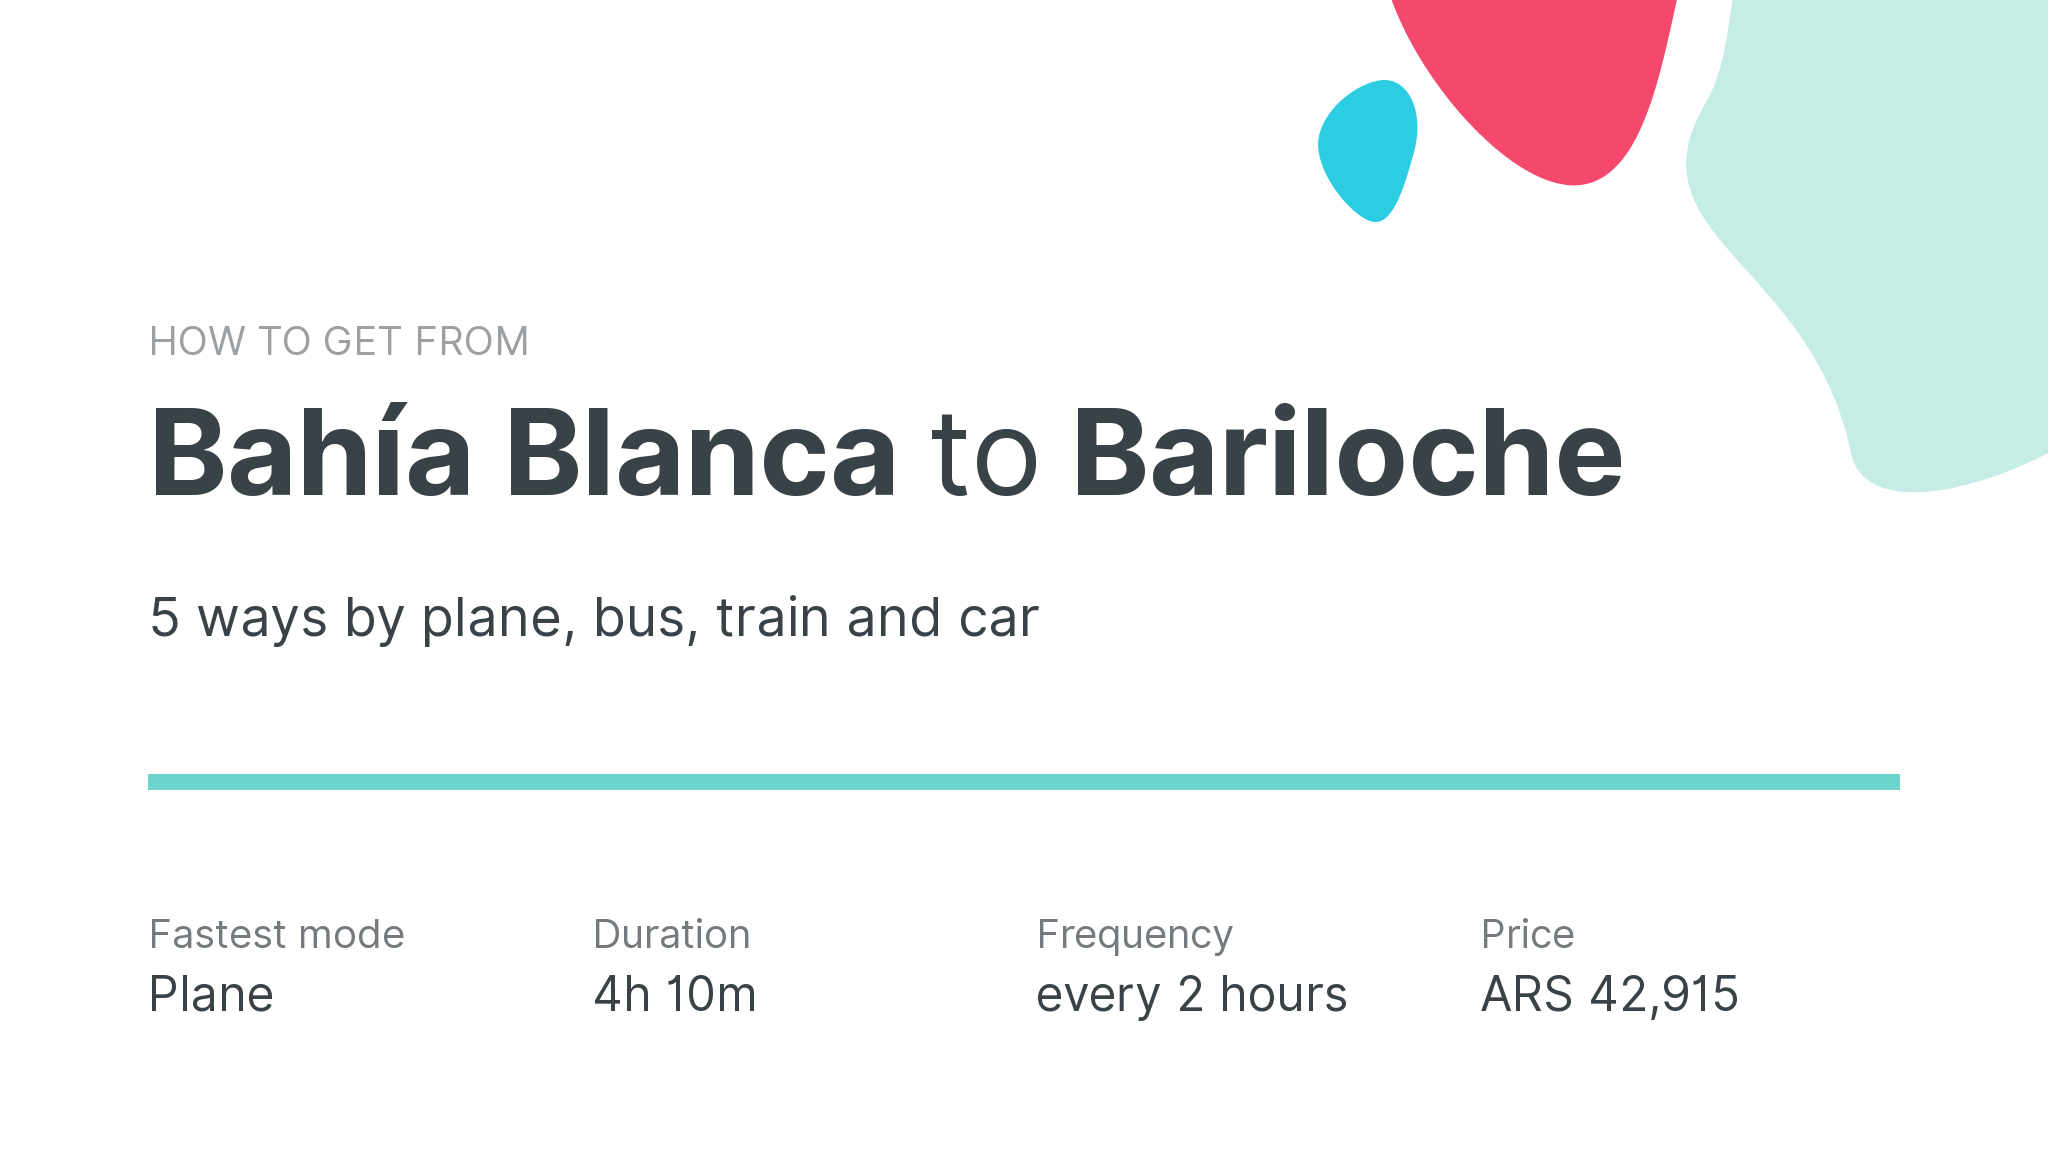 How do I get from Bahía Blanca to Bariloche